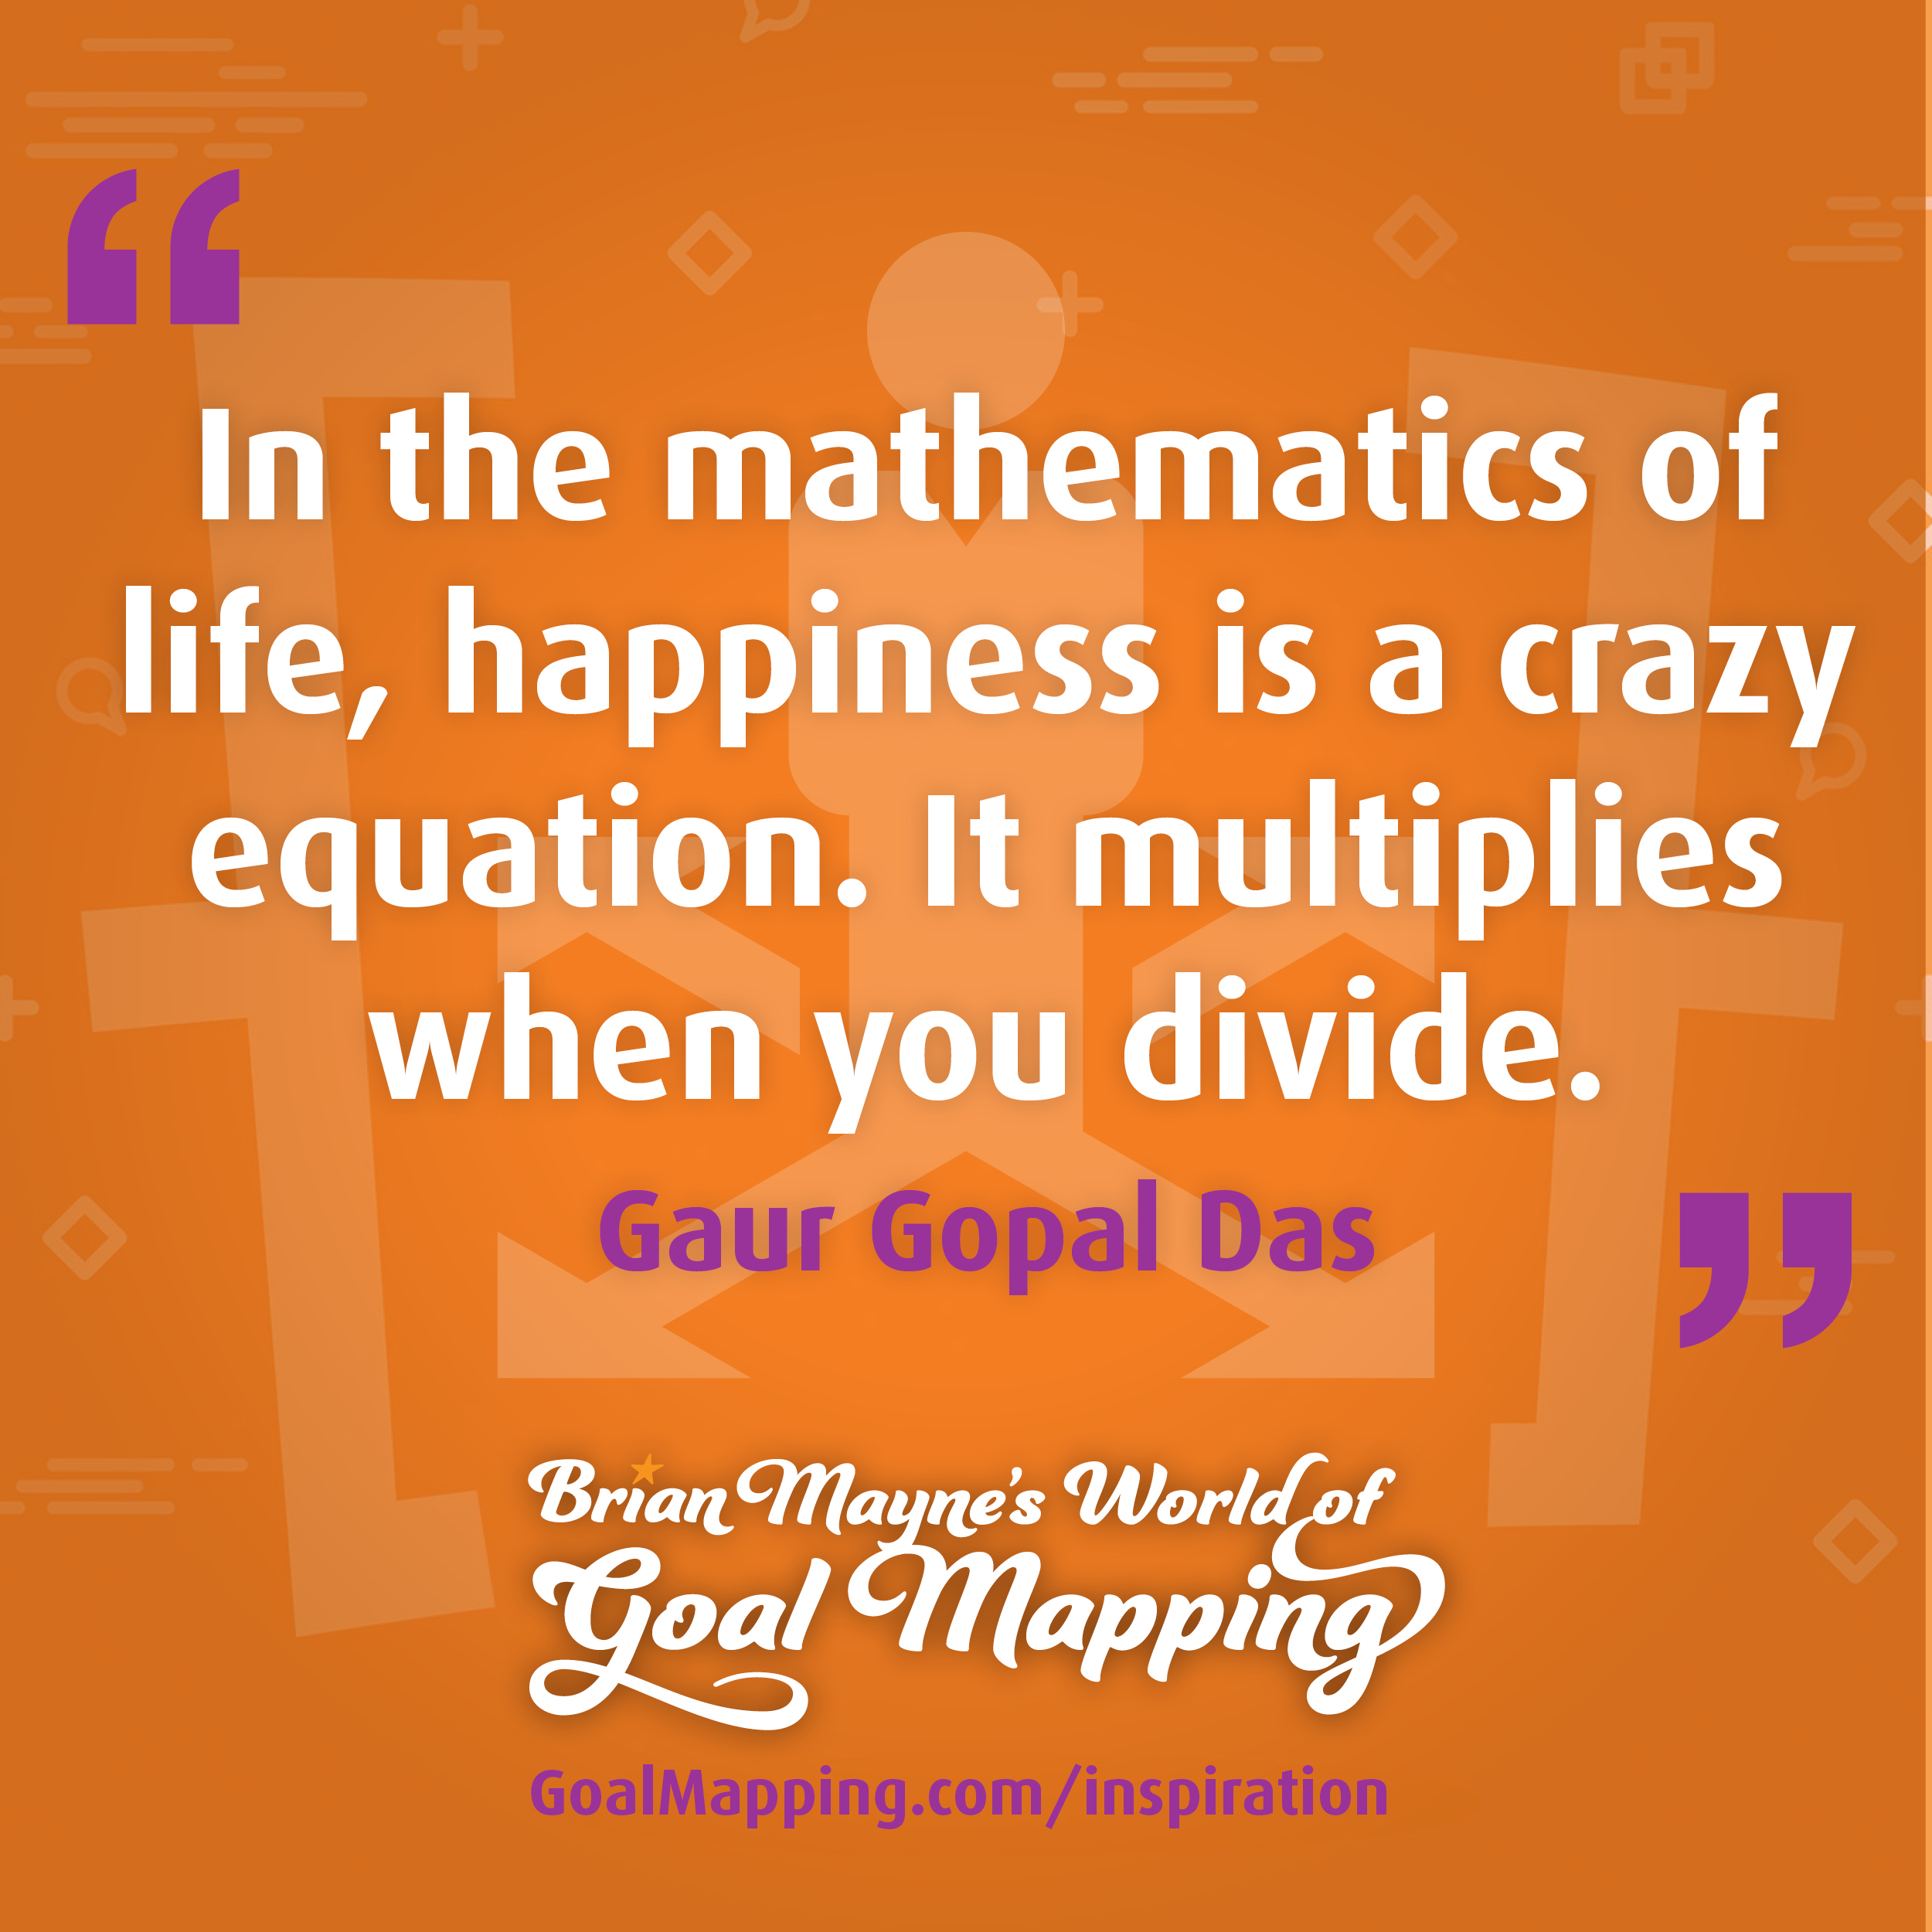 "In the mathematics of life, happiness is a crazy equation. It multiplies when you divide." Gaur Gopal Das